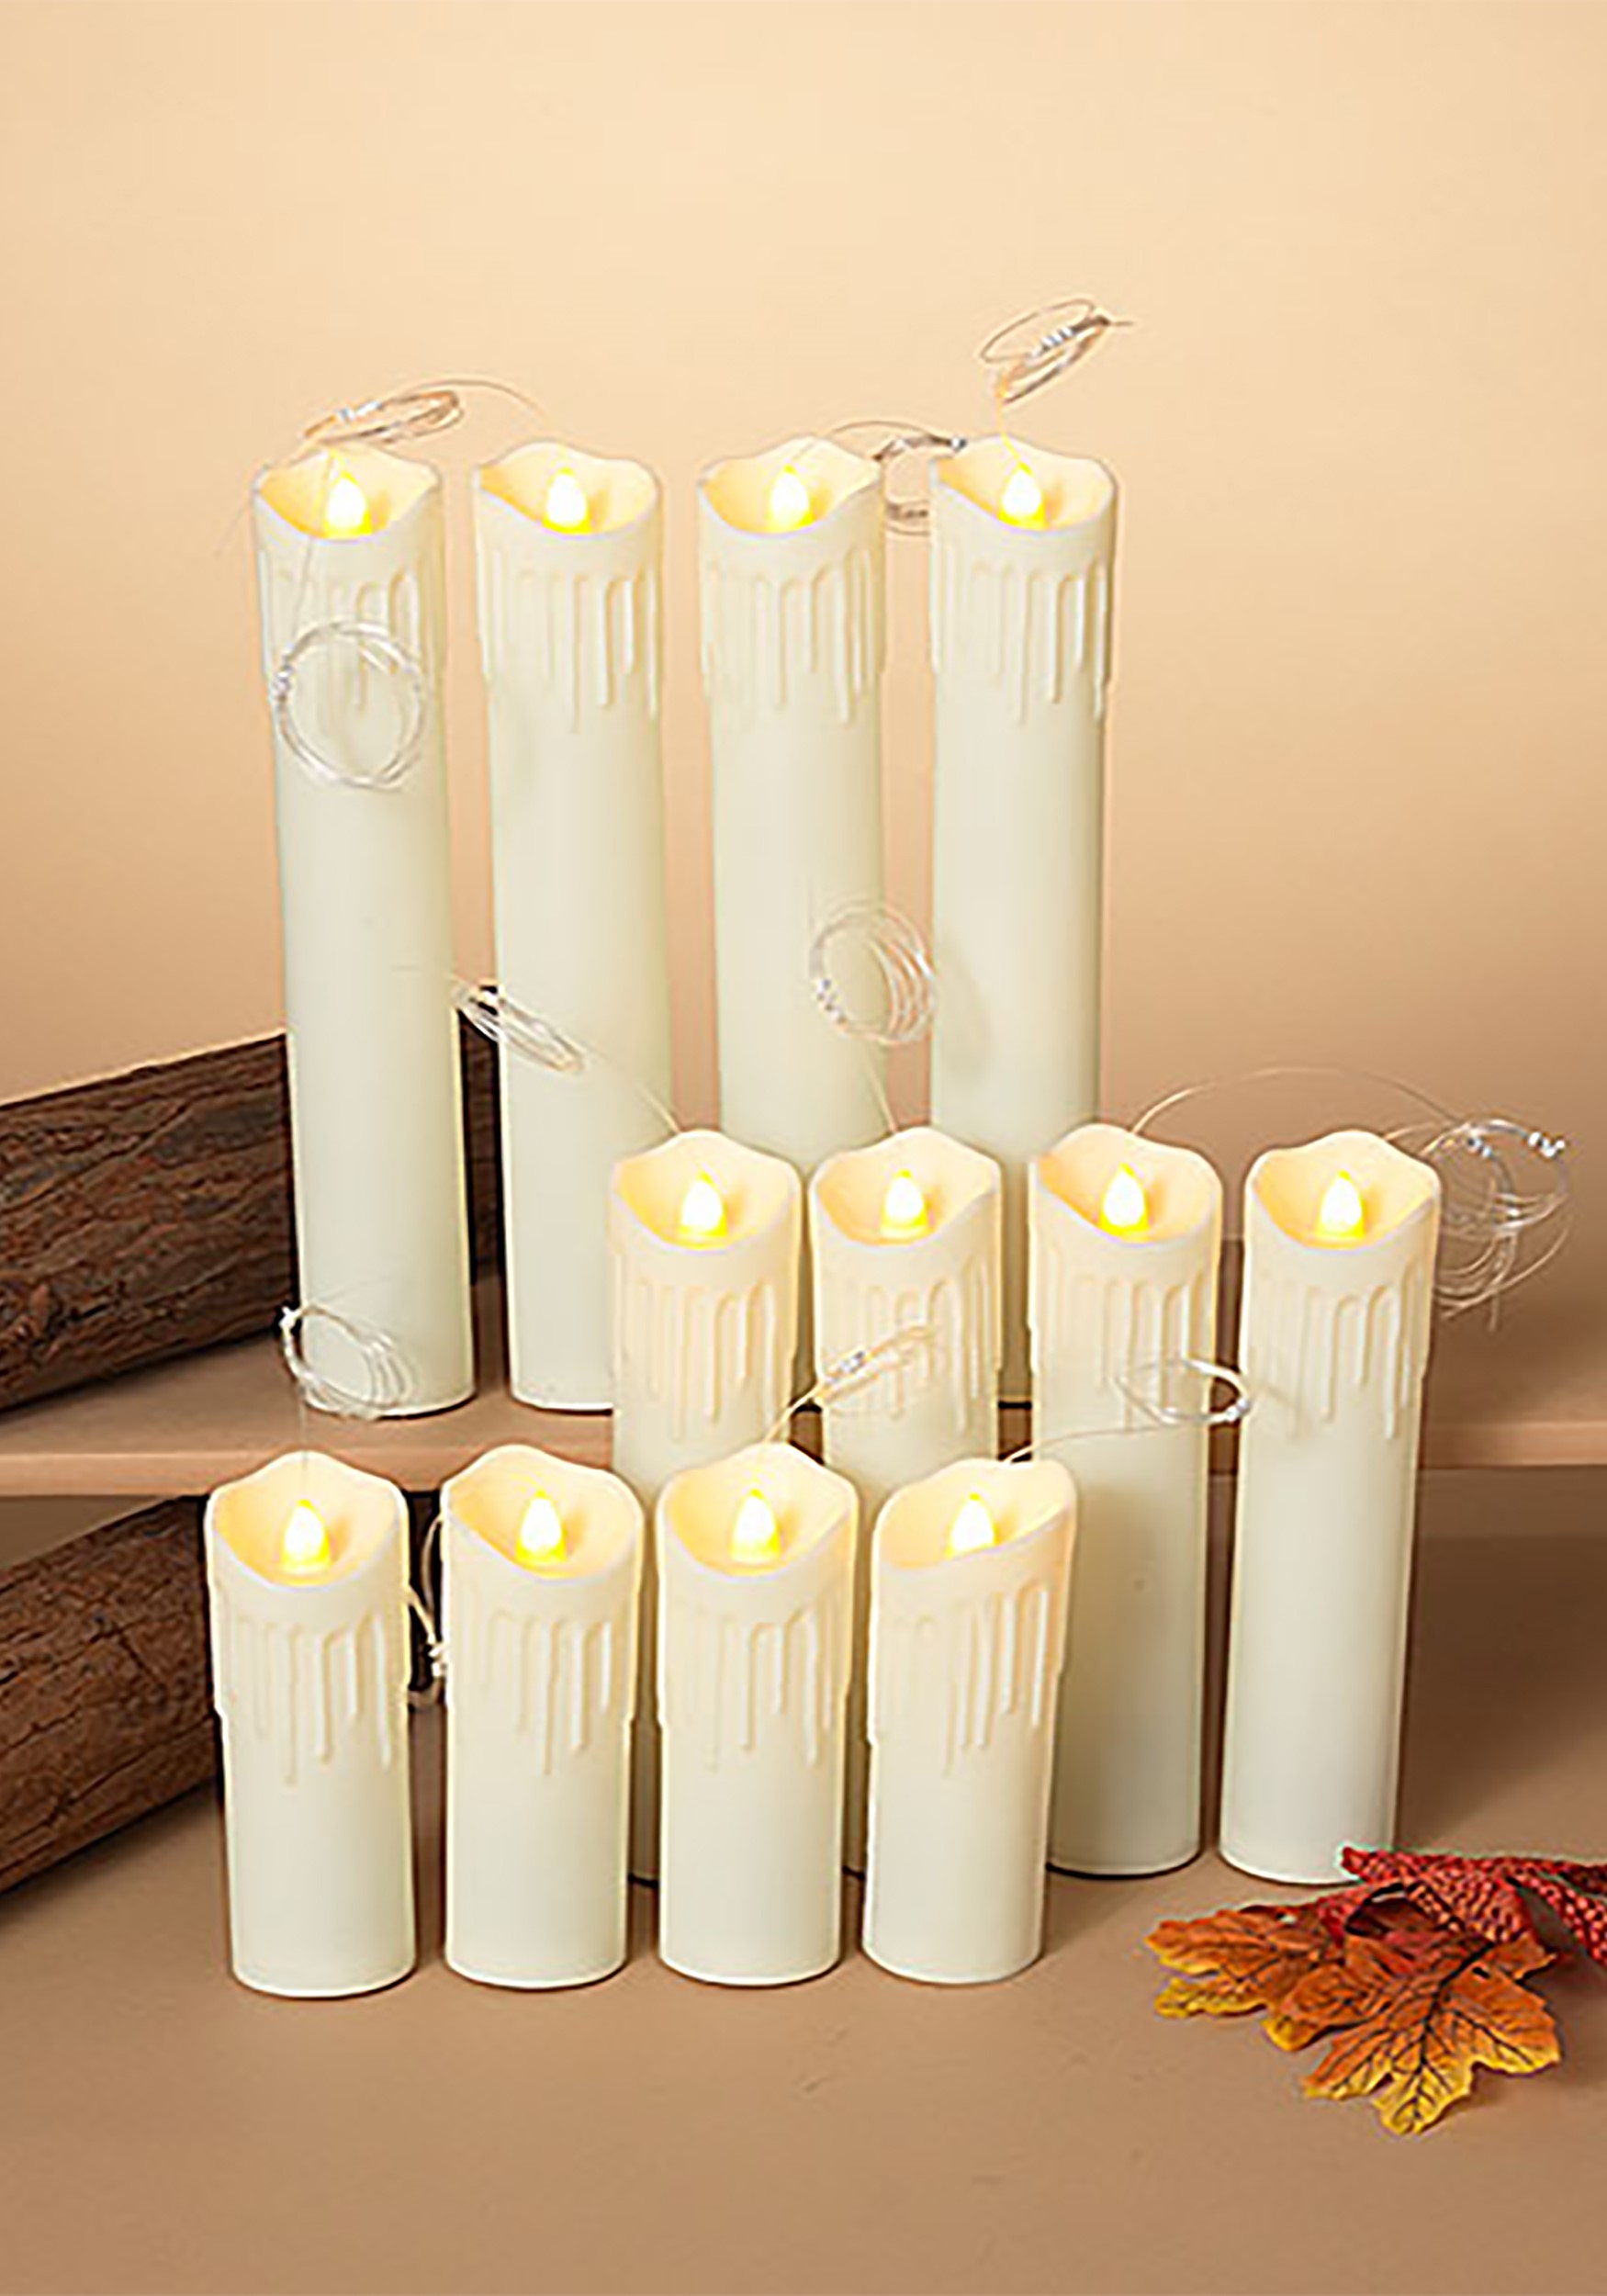 12 Lighted Spooky Halloween Hanging Candles with Timer and Remote